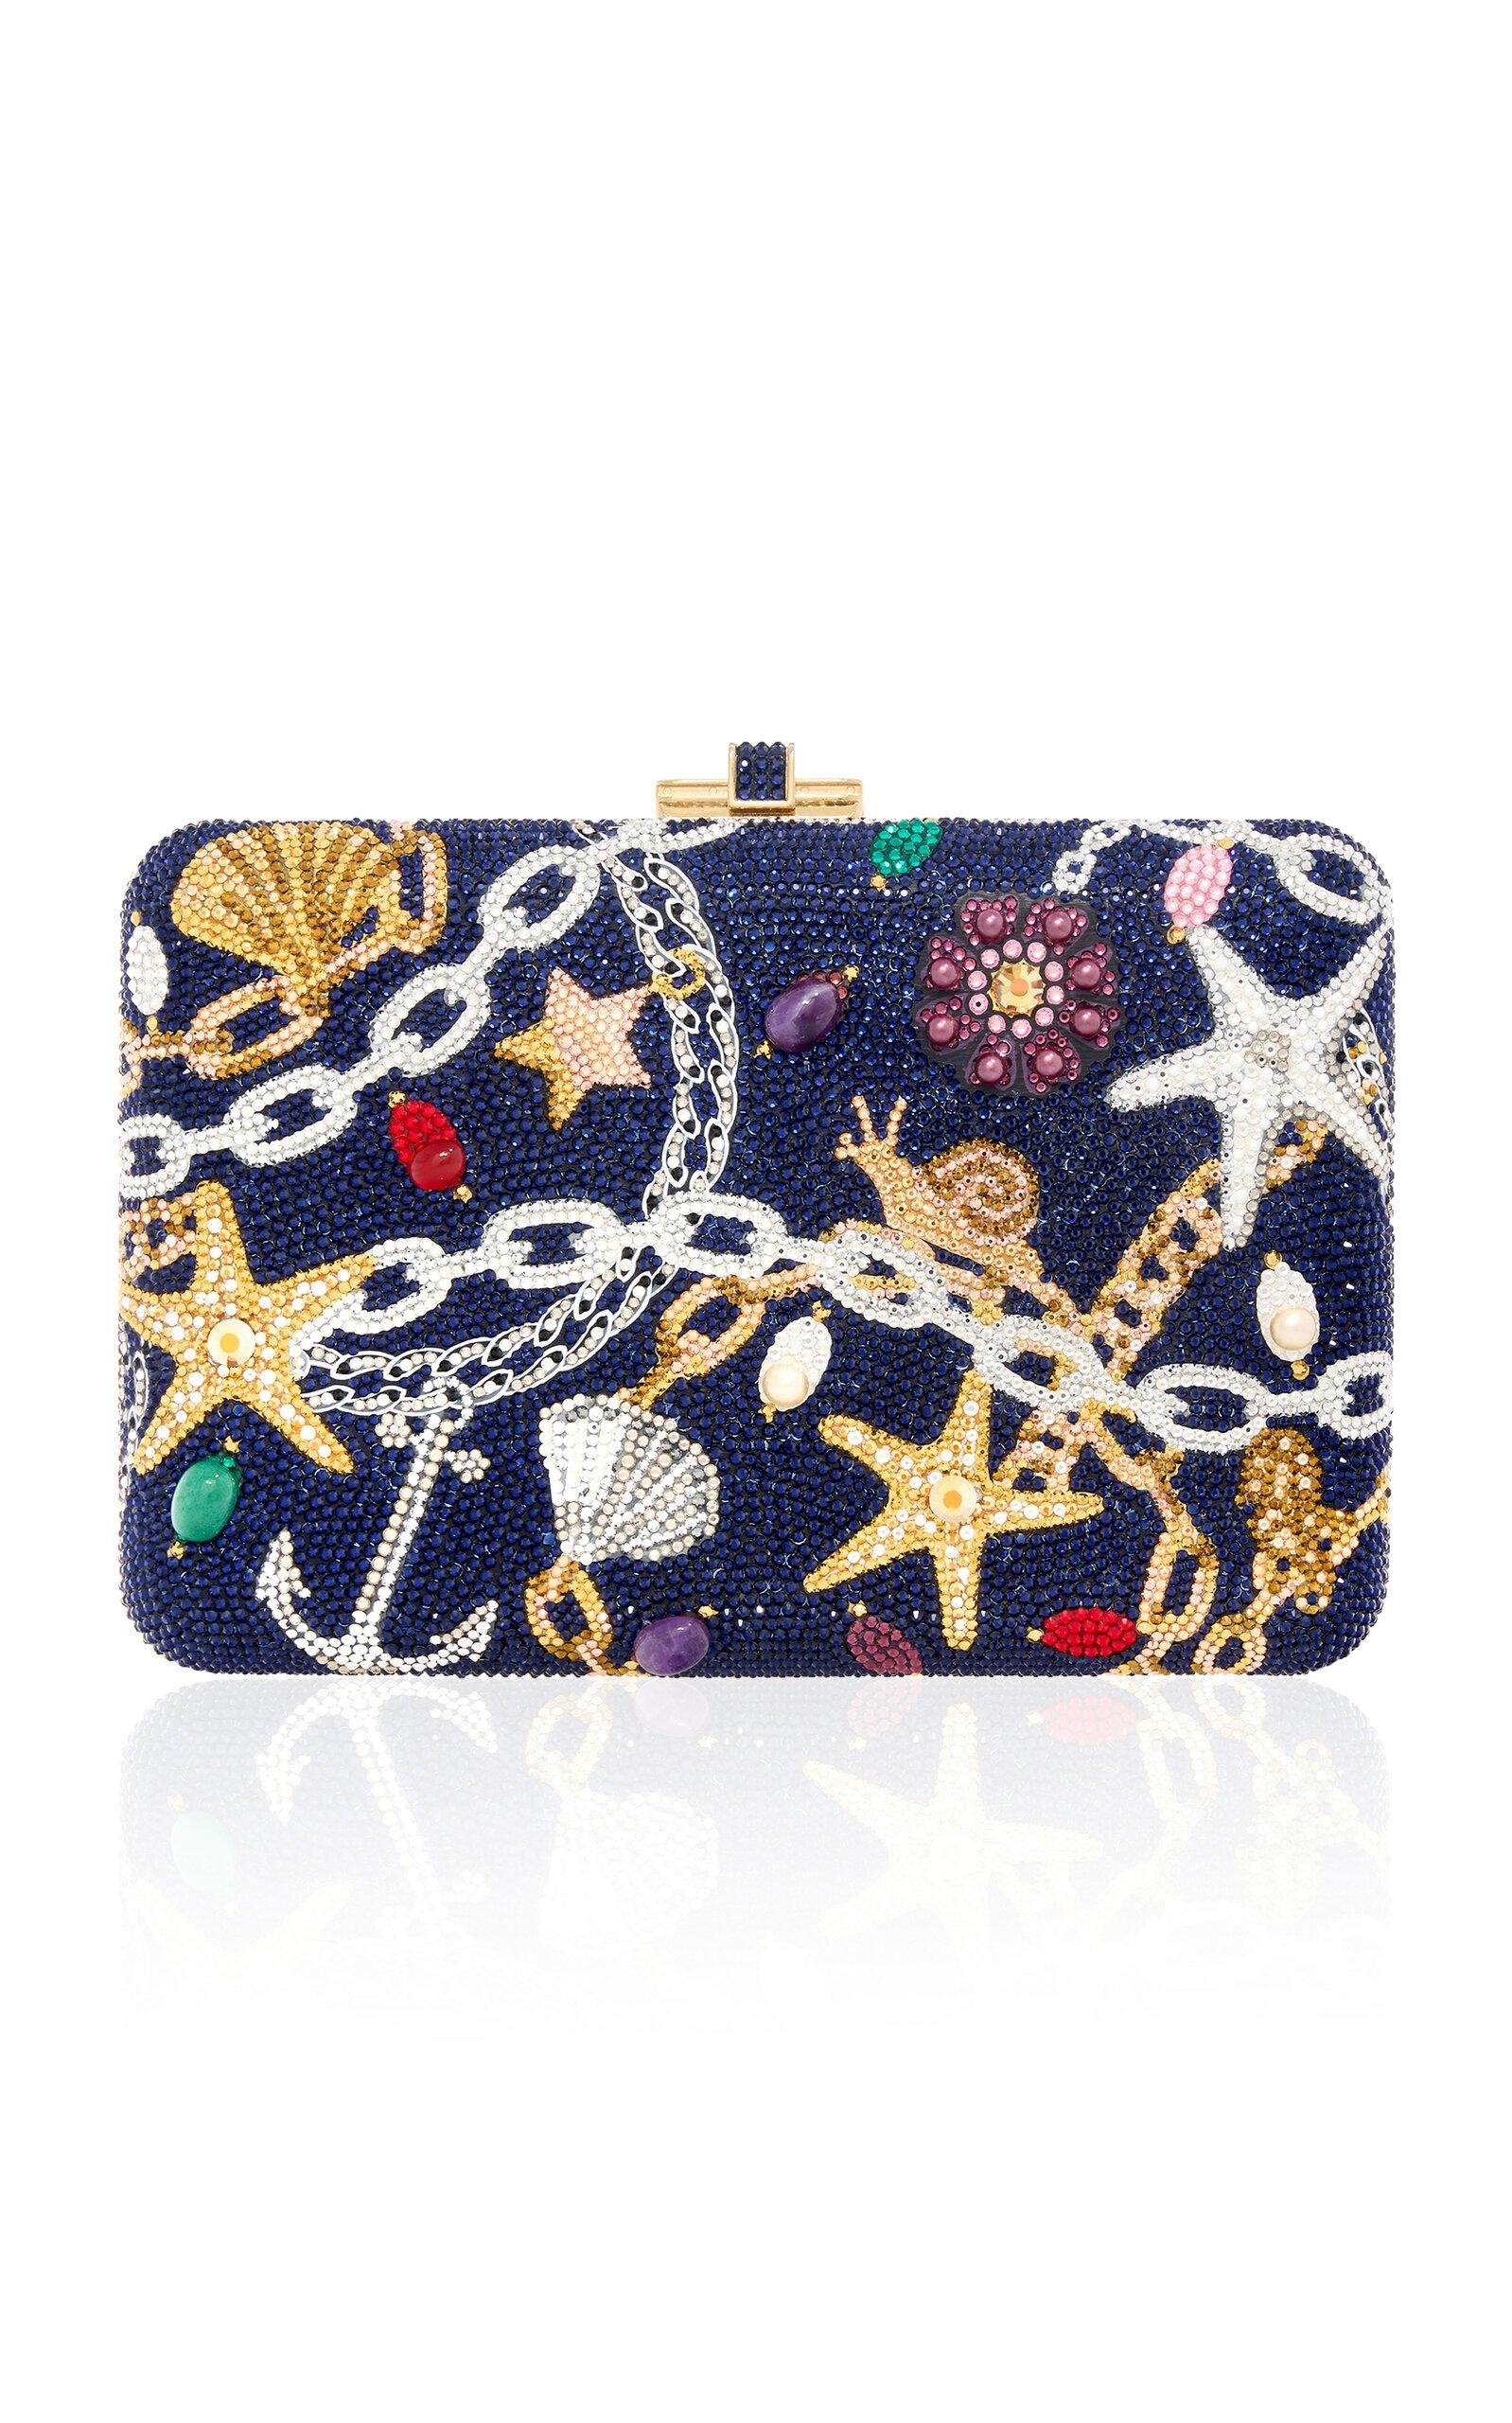 Judith Leiber Couture - Nautical Chains Crystal Clutch - Navy - OS - Only At Moda Operandi by JUDITH LEIBER COUTURE